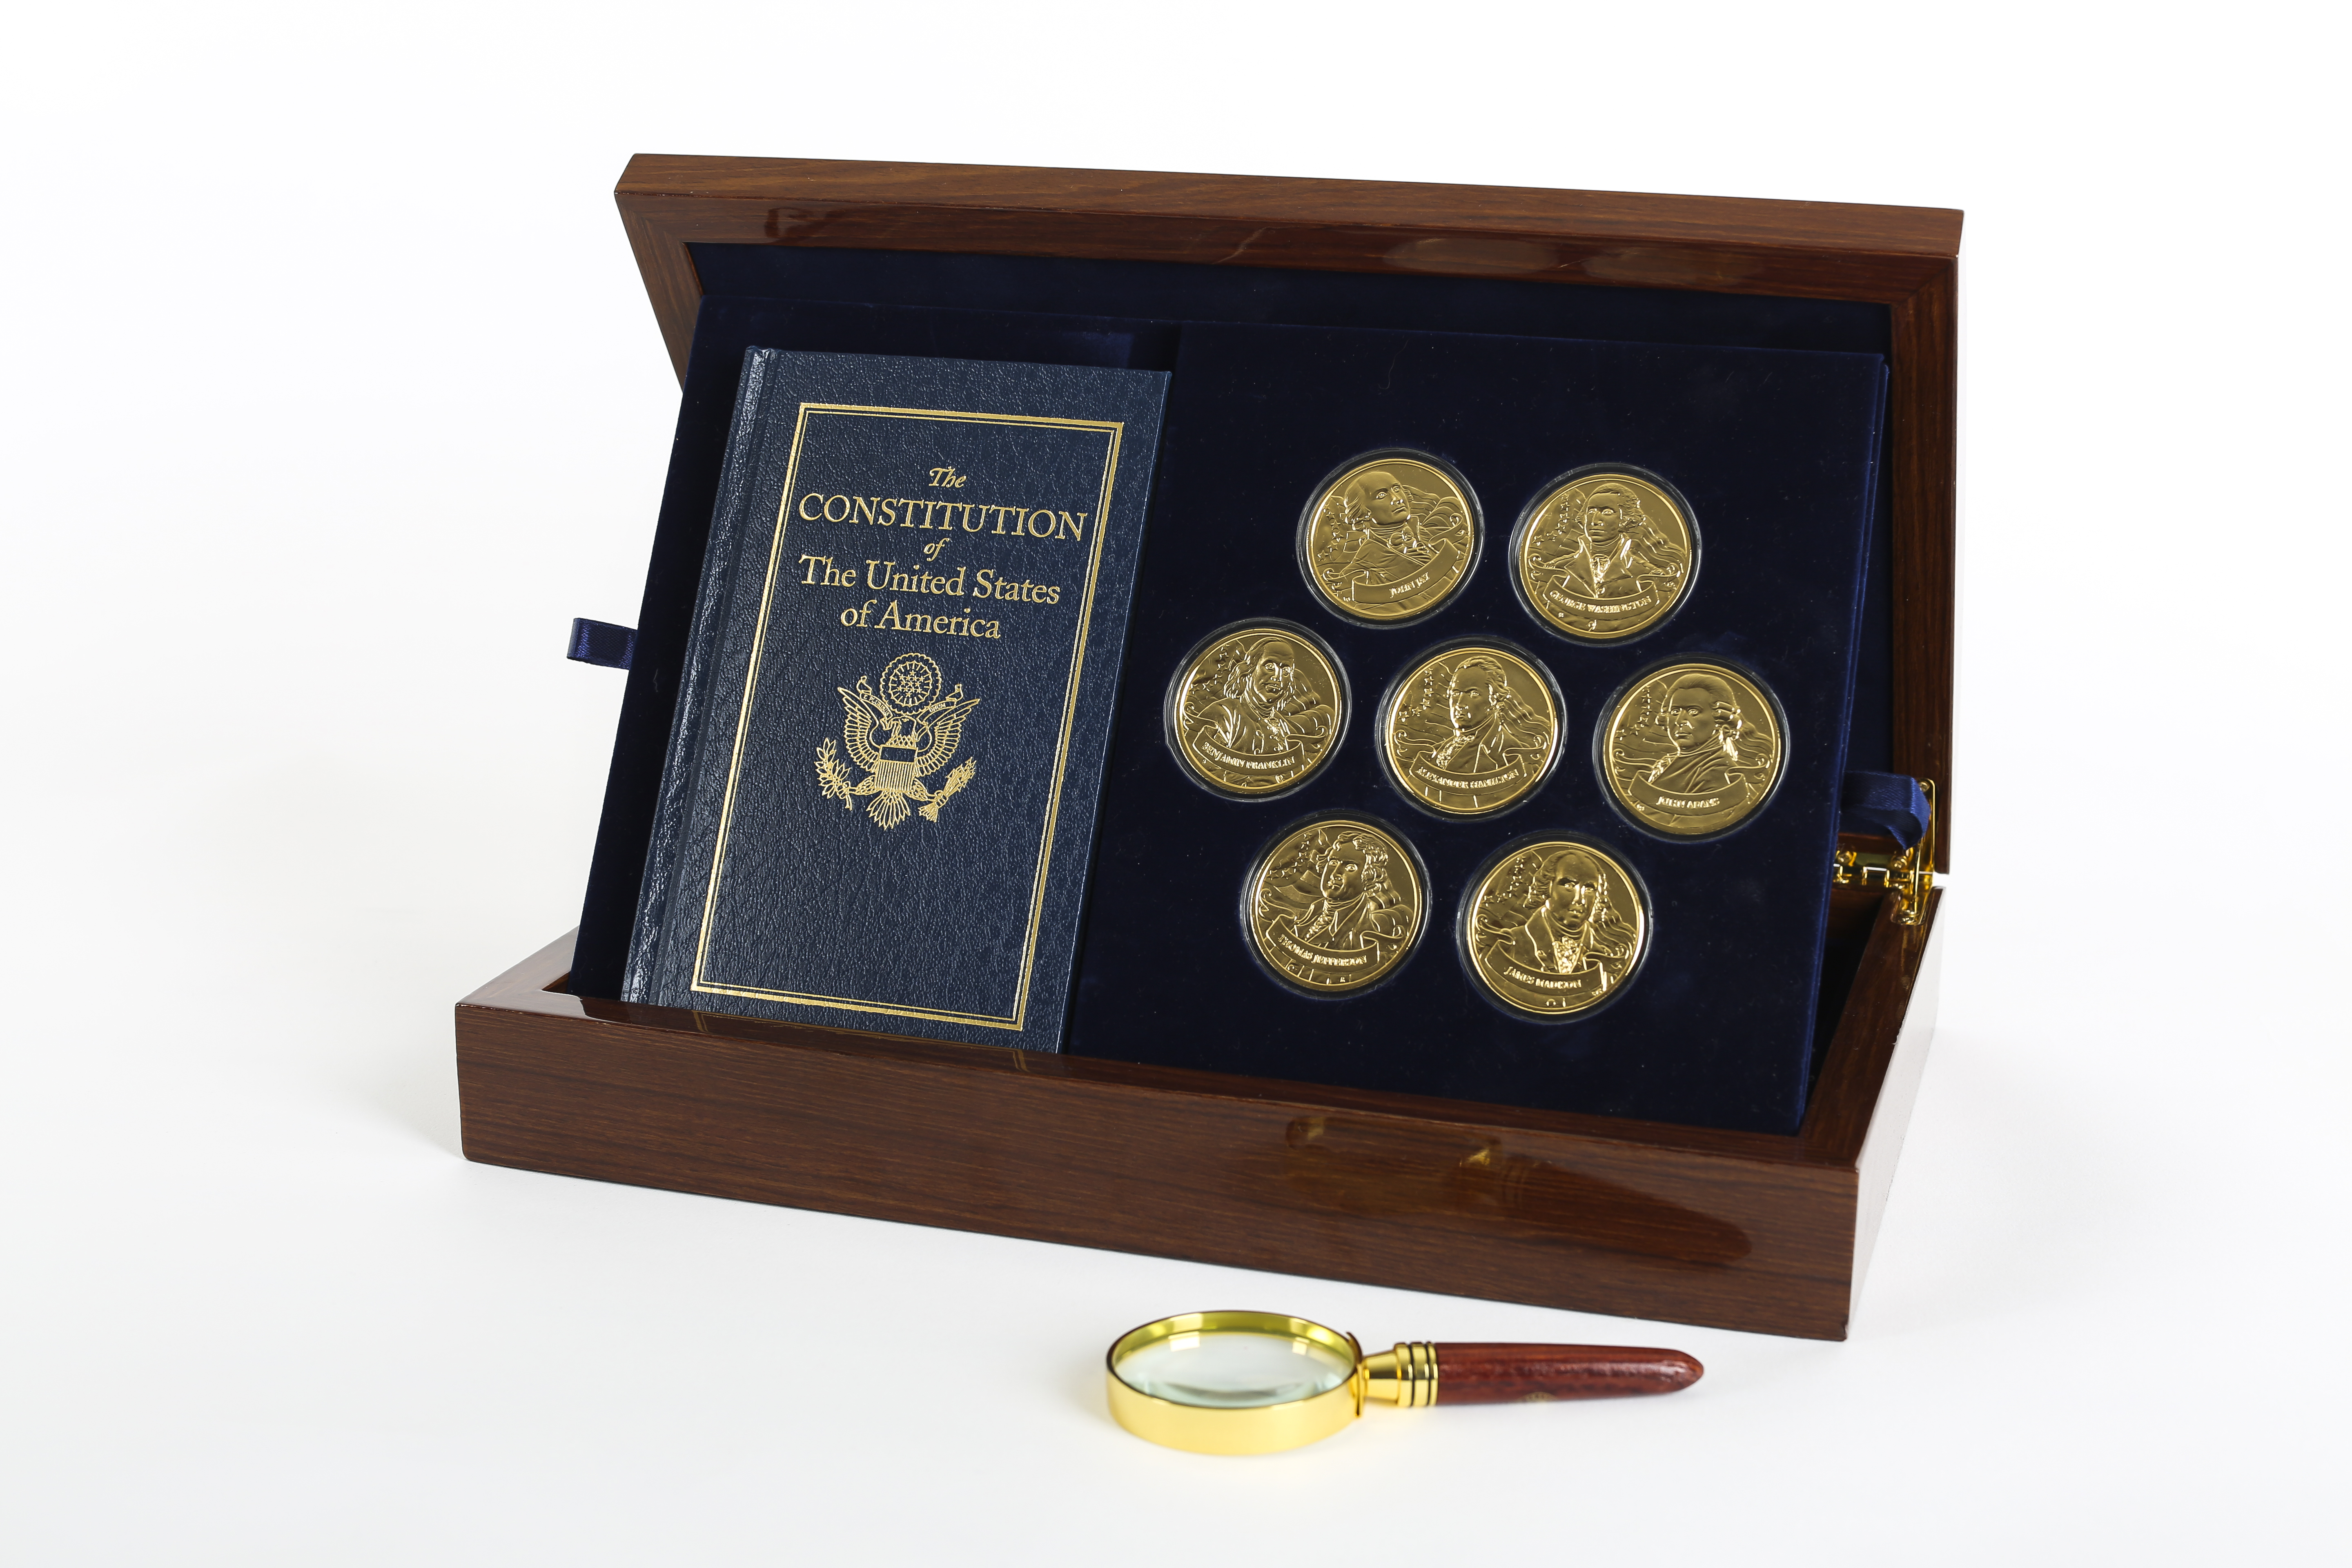 Founding Fathers of America Coin Collection The Franklin Mint